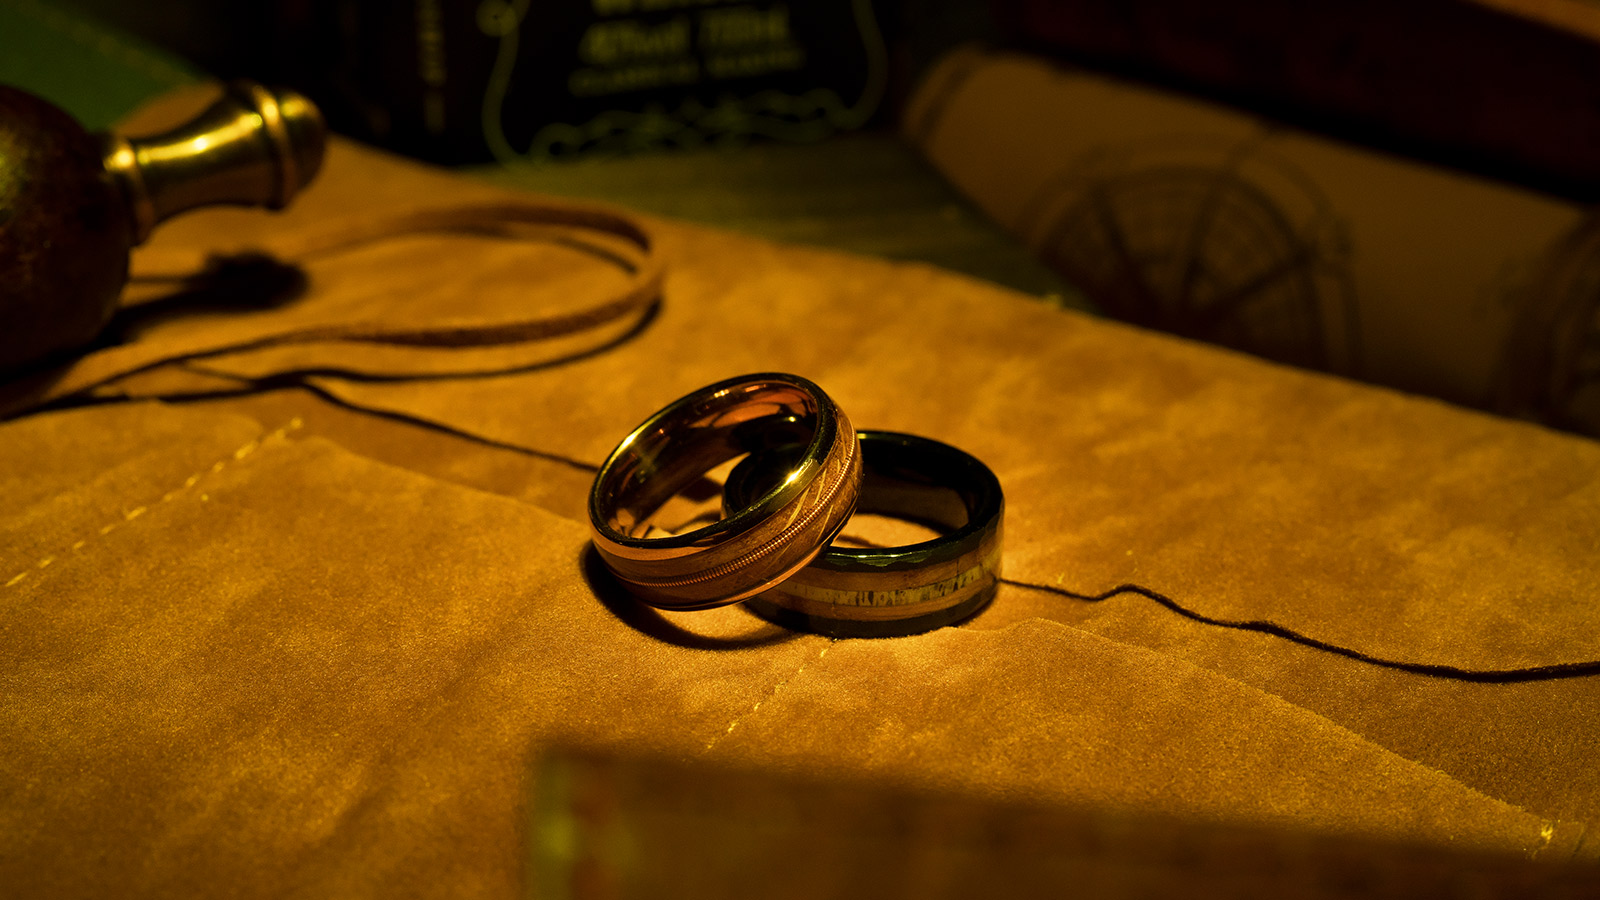 The yellow gold ring was placed on a cowhide cloth